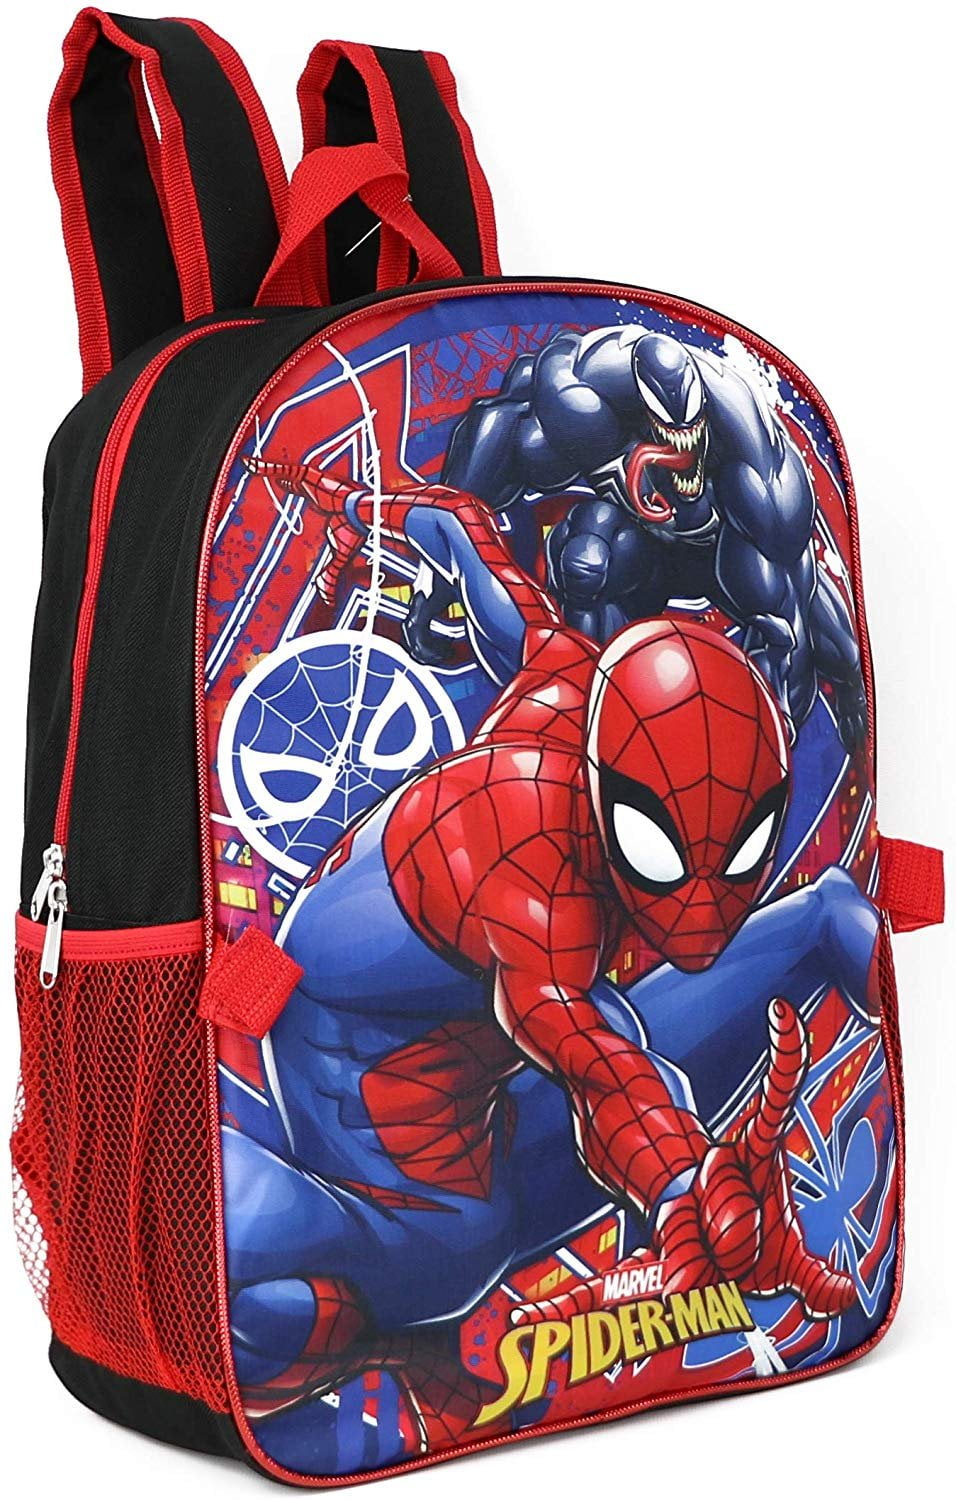 Spiderman Marvel 16 Backpack with Detachable Lunch Box